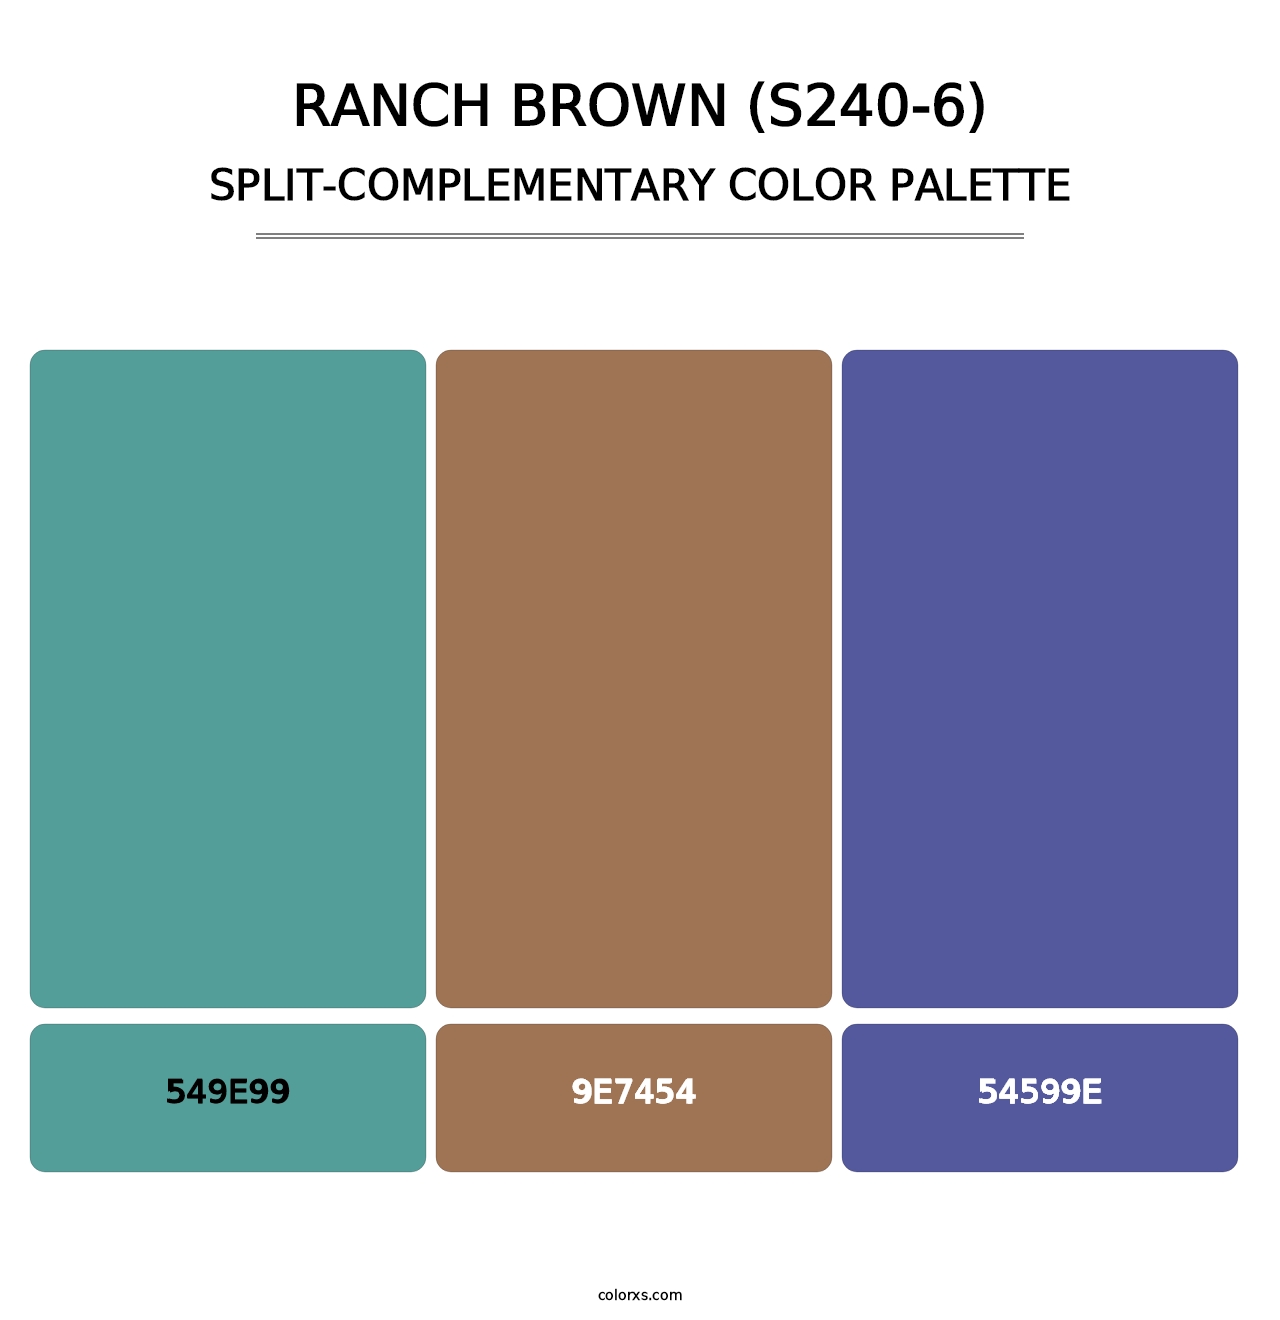 Ranch Brown (S240-6) - Split-Complementary Color Palette